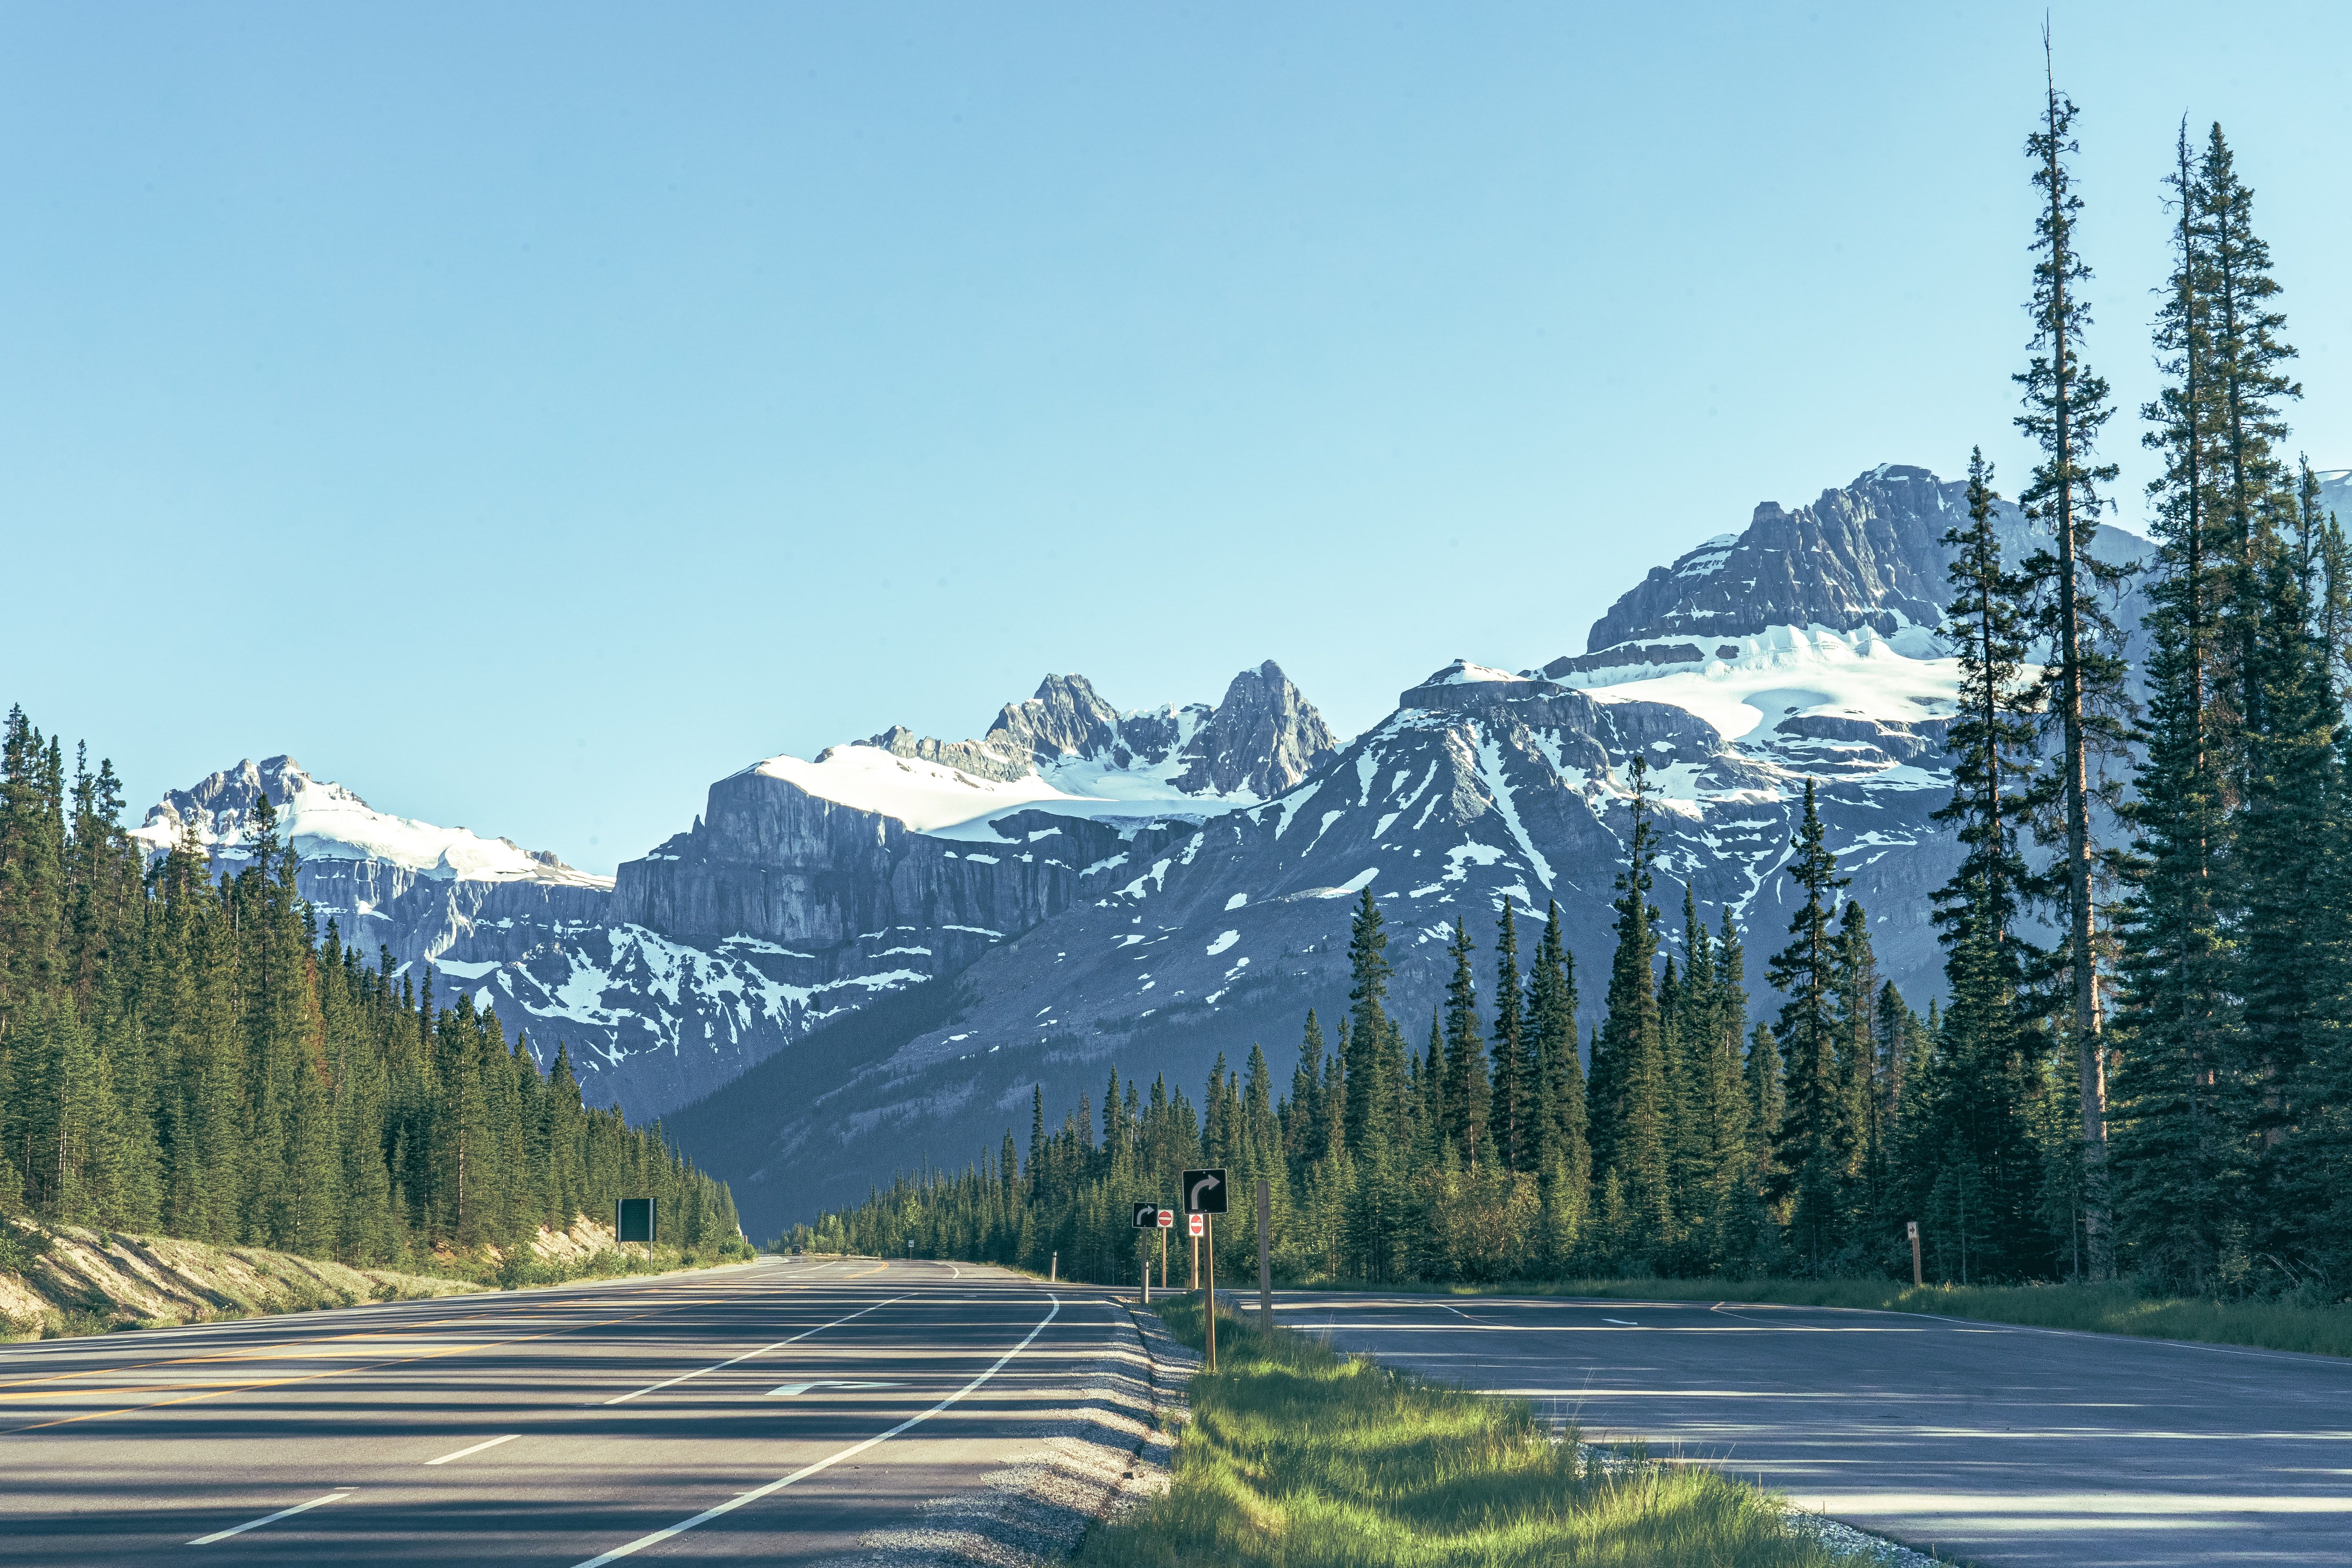 10 of Alberta’s Most Beautiful Road Trips Worth Crossing The Border For